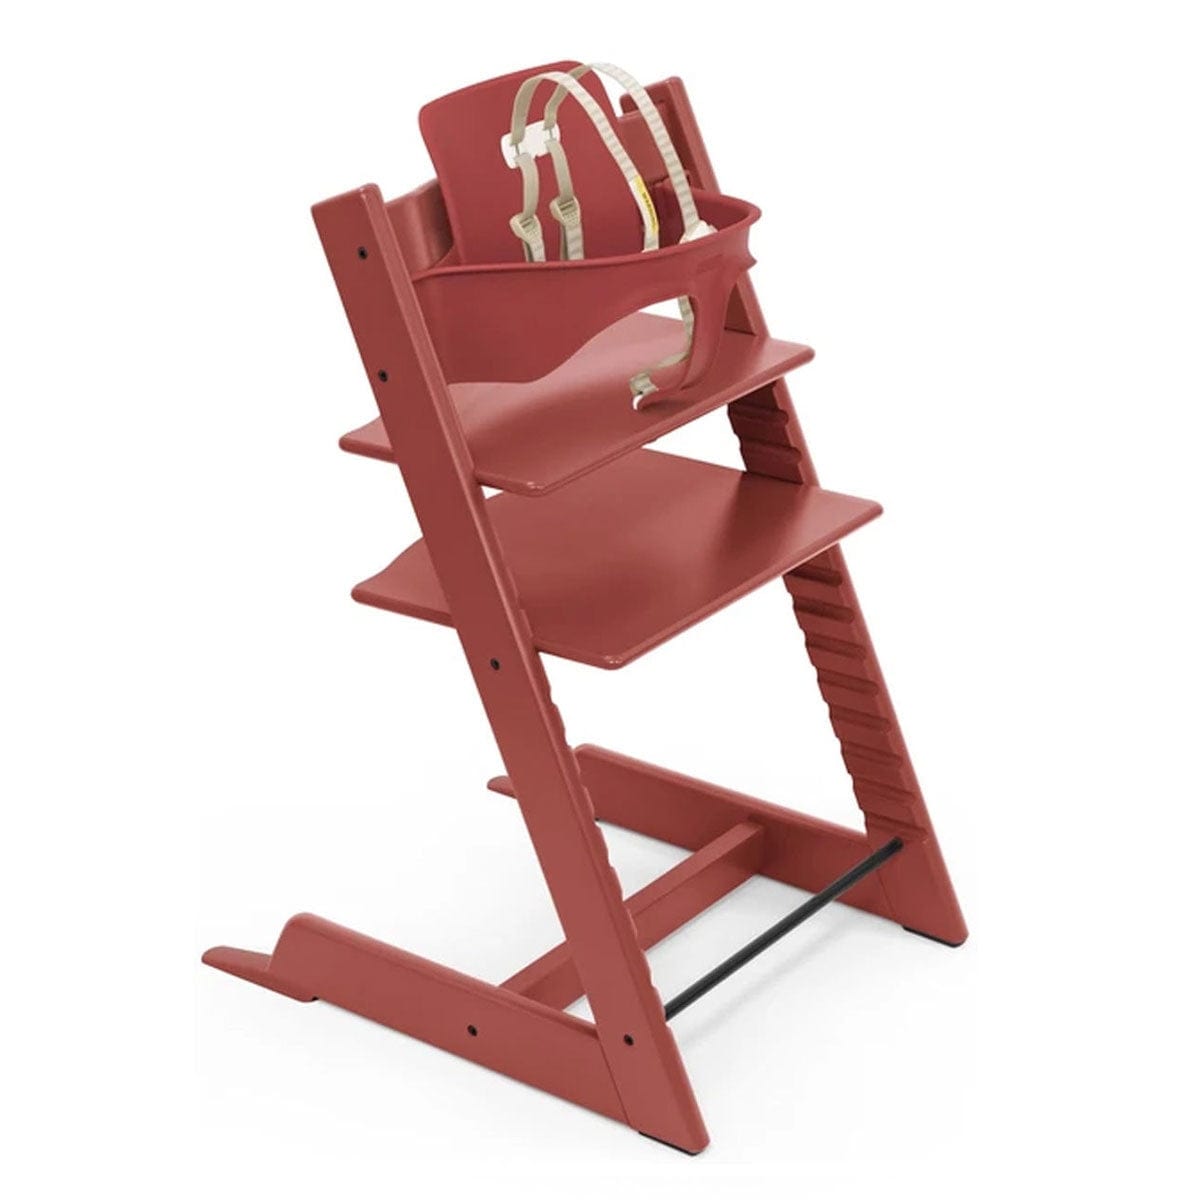 Stokke High Chairs & Booster Seats Warm Red Stokke Tripp Trapp® High Chair Bundle